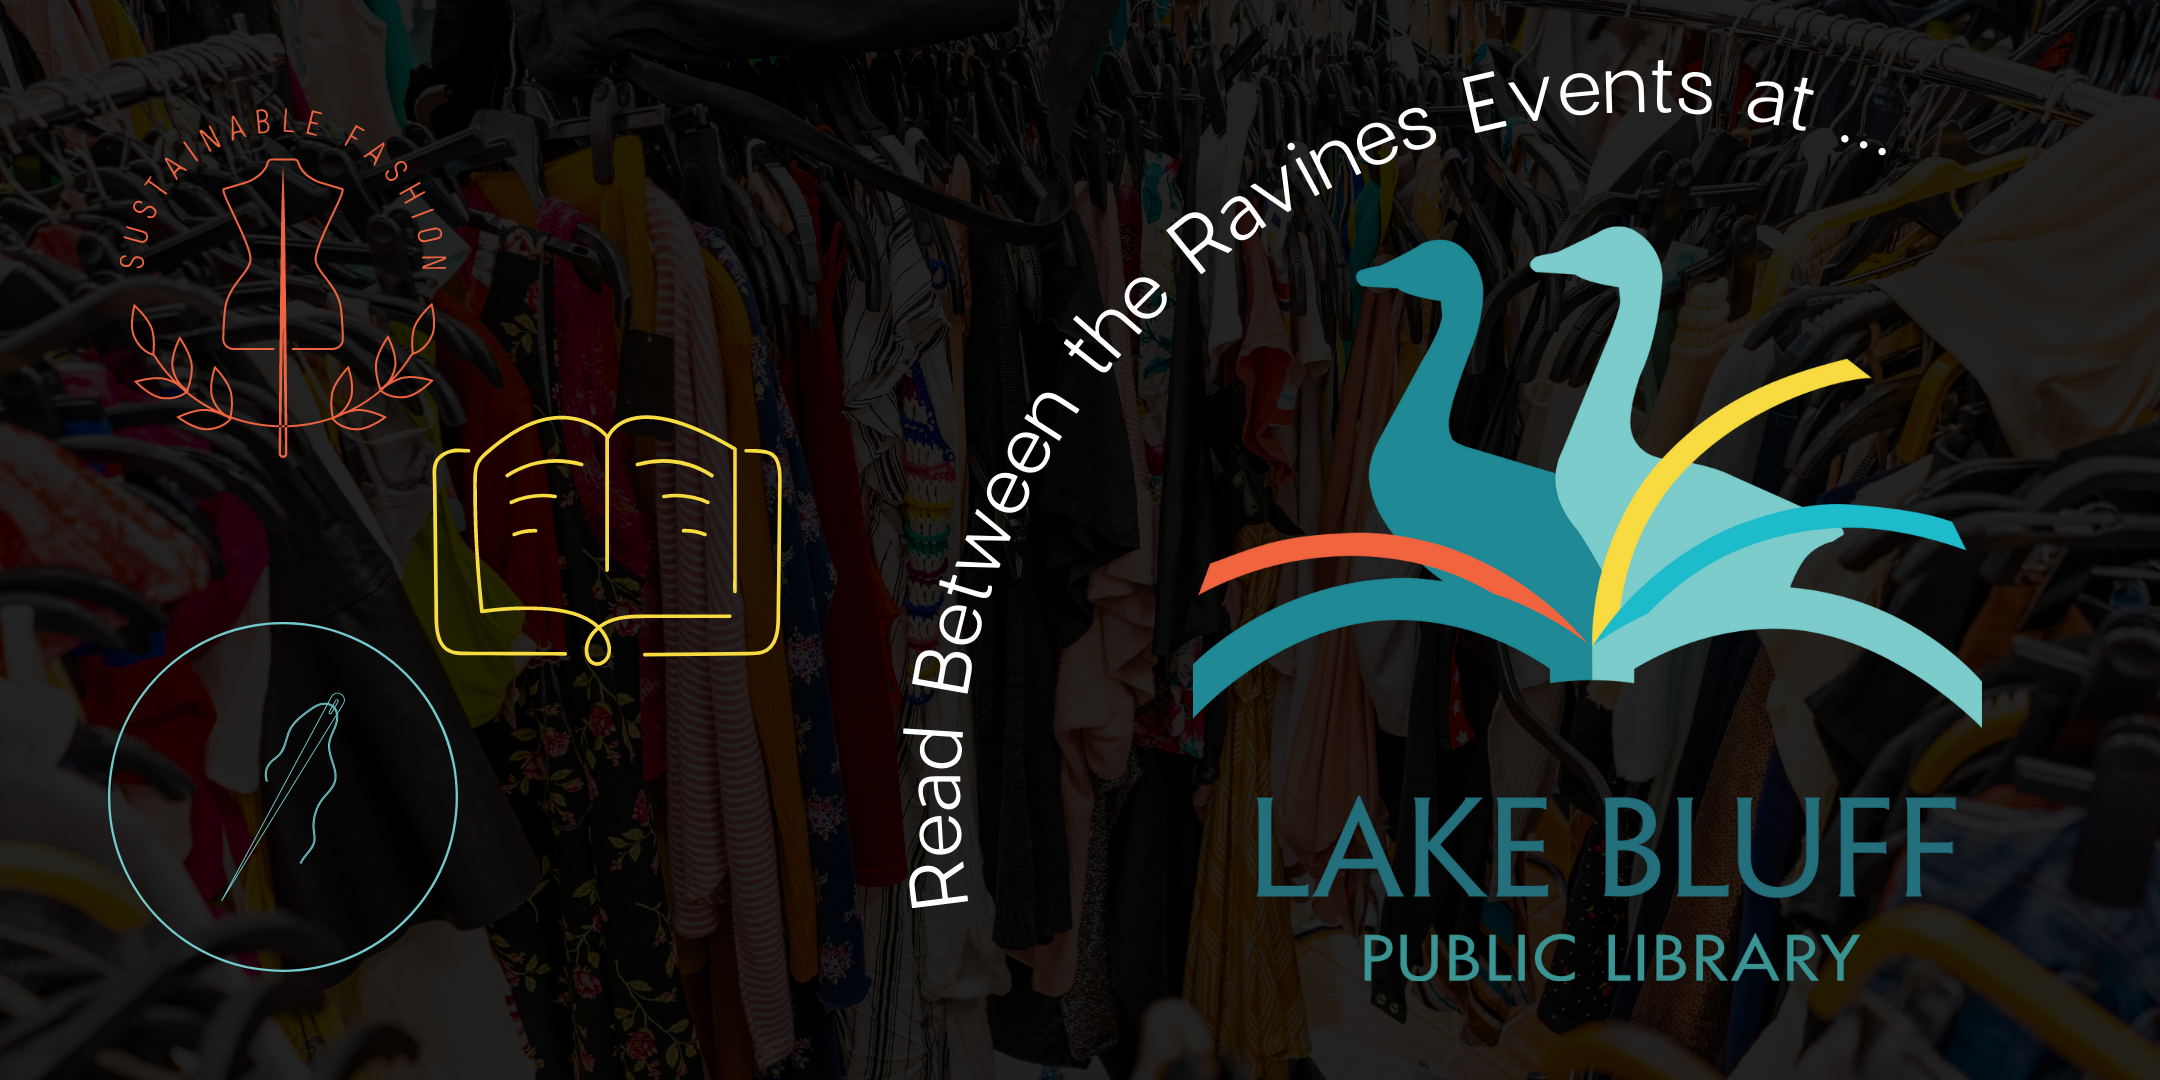 Read Between the Ravines Events at Lake Bluff Public Library image